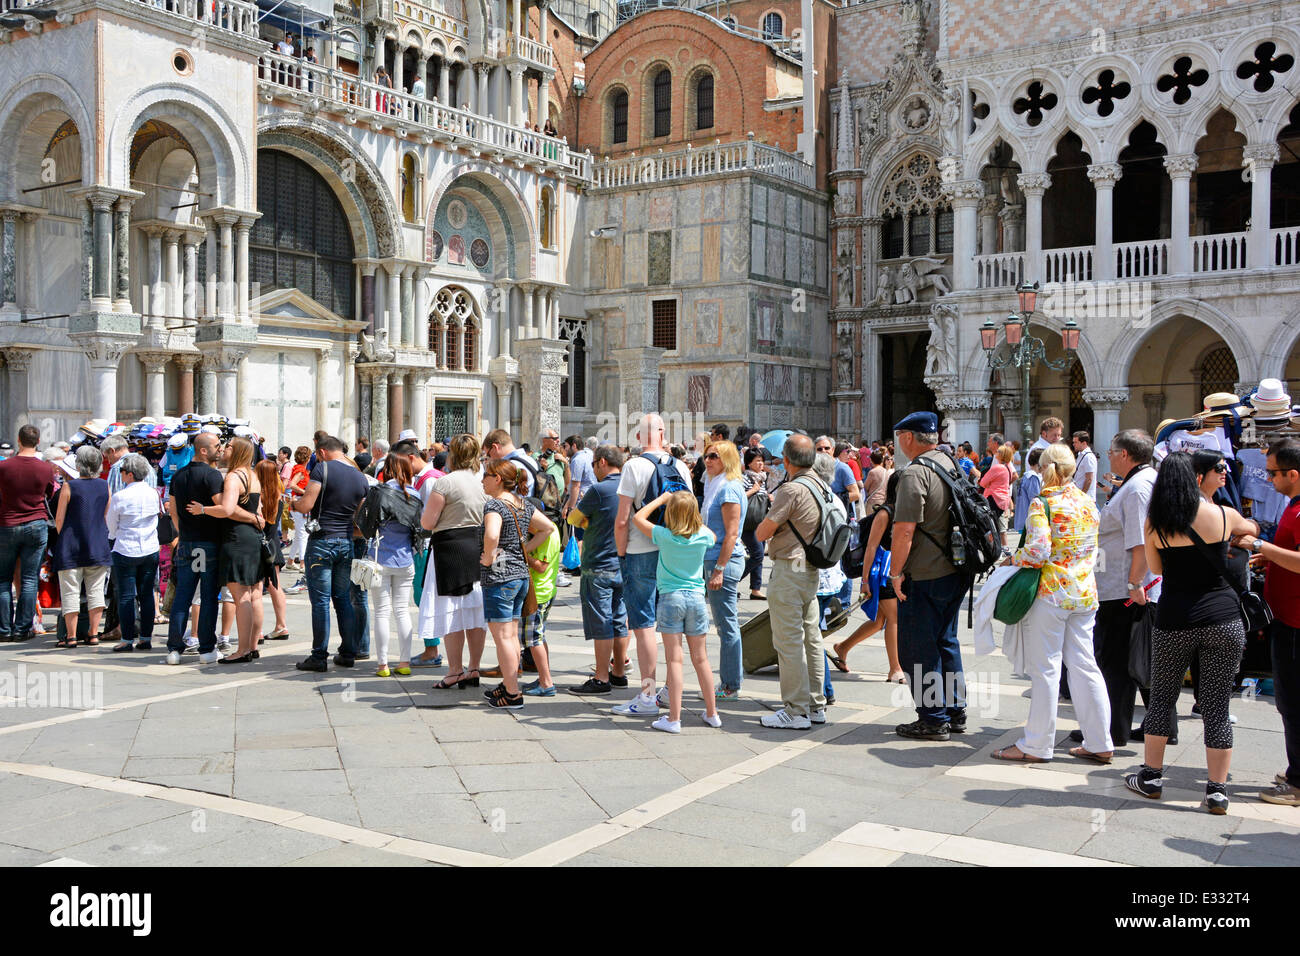 People in casual clothes long queue of summer tourists queuing waiting outside Italian Doges Palace towards historical St Marks Basilica Venice Italy Stock Photo